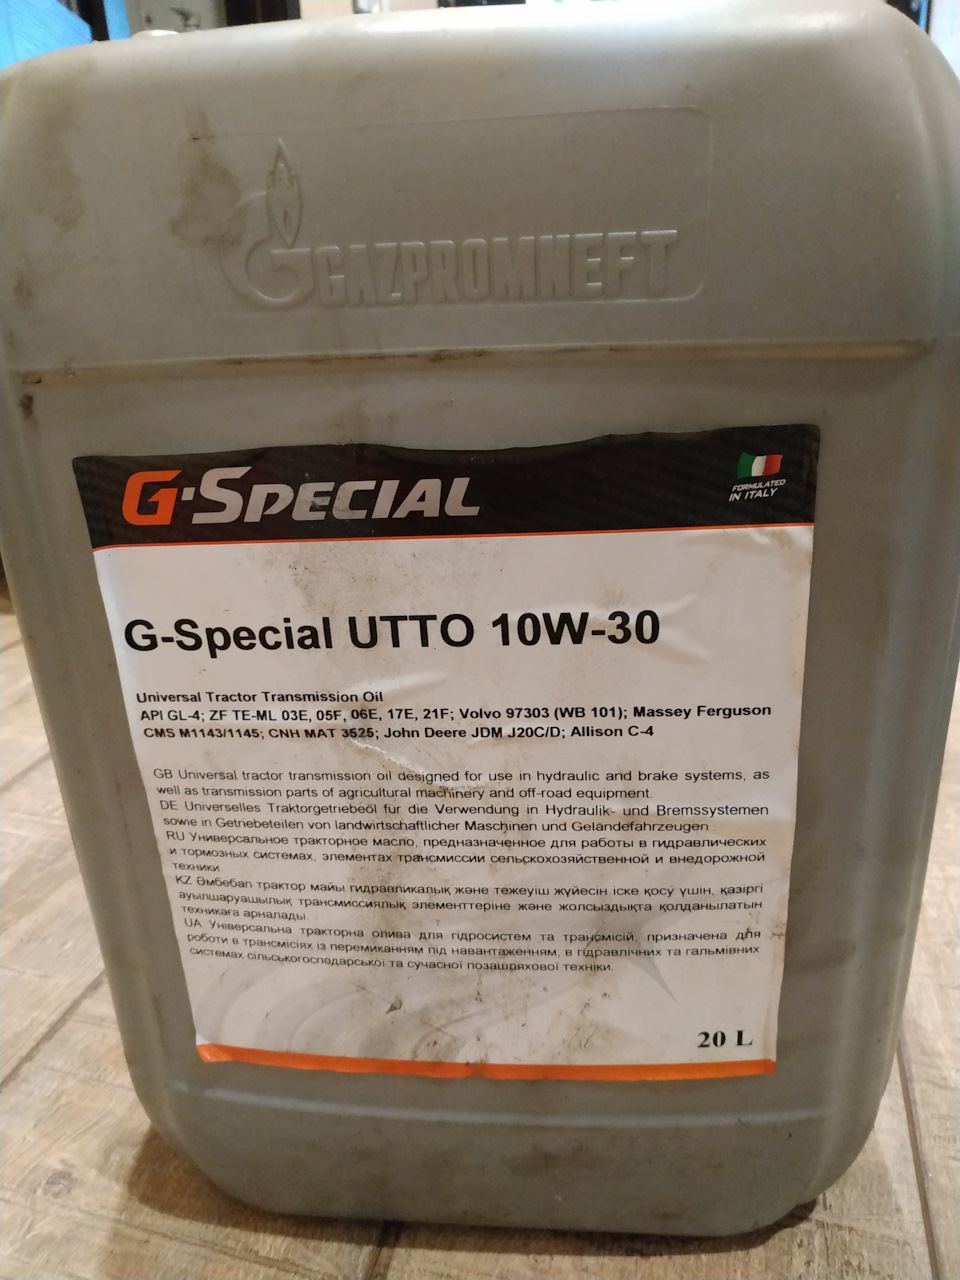 Масло utto 10w 30. G-Special UTTO 10w-30. Масло гидравлическое g-Special UTTO 10w30. Масло g-Special UTTO 10w-30 плотность.